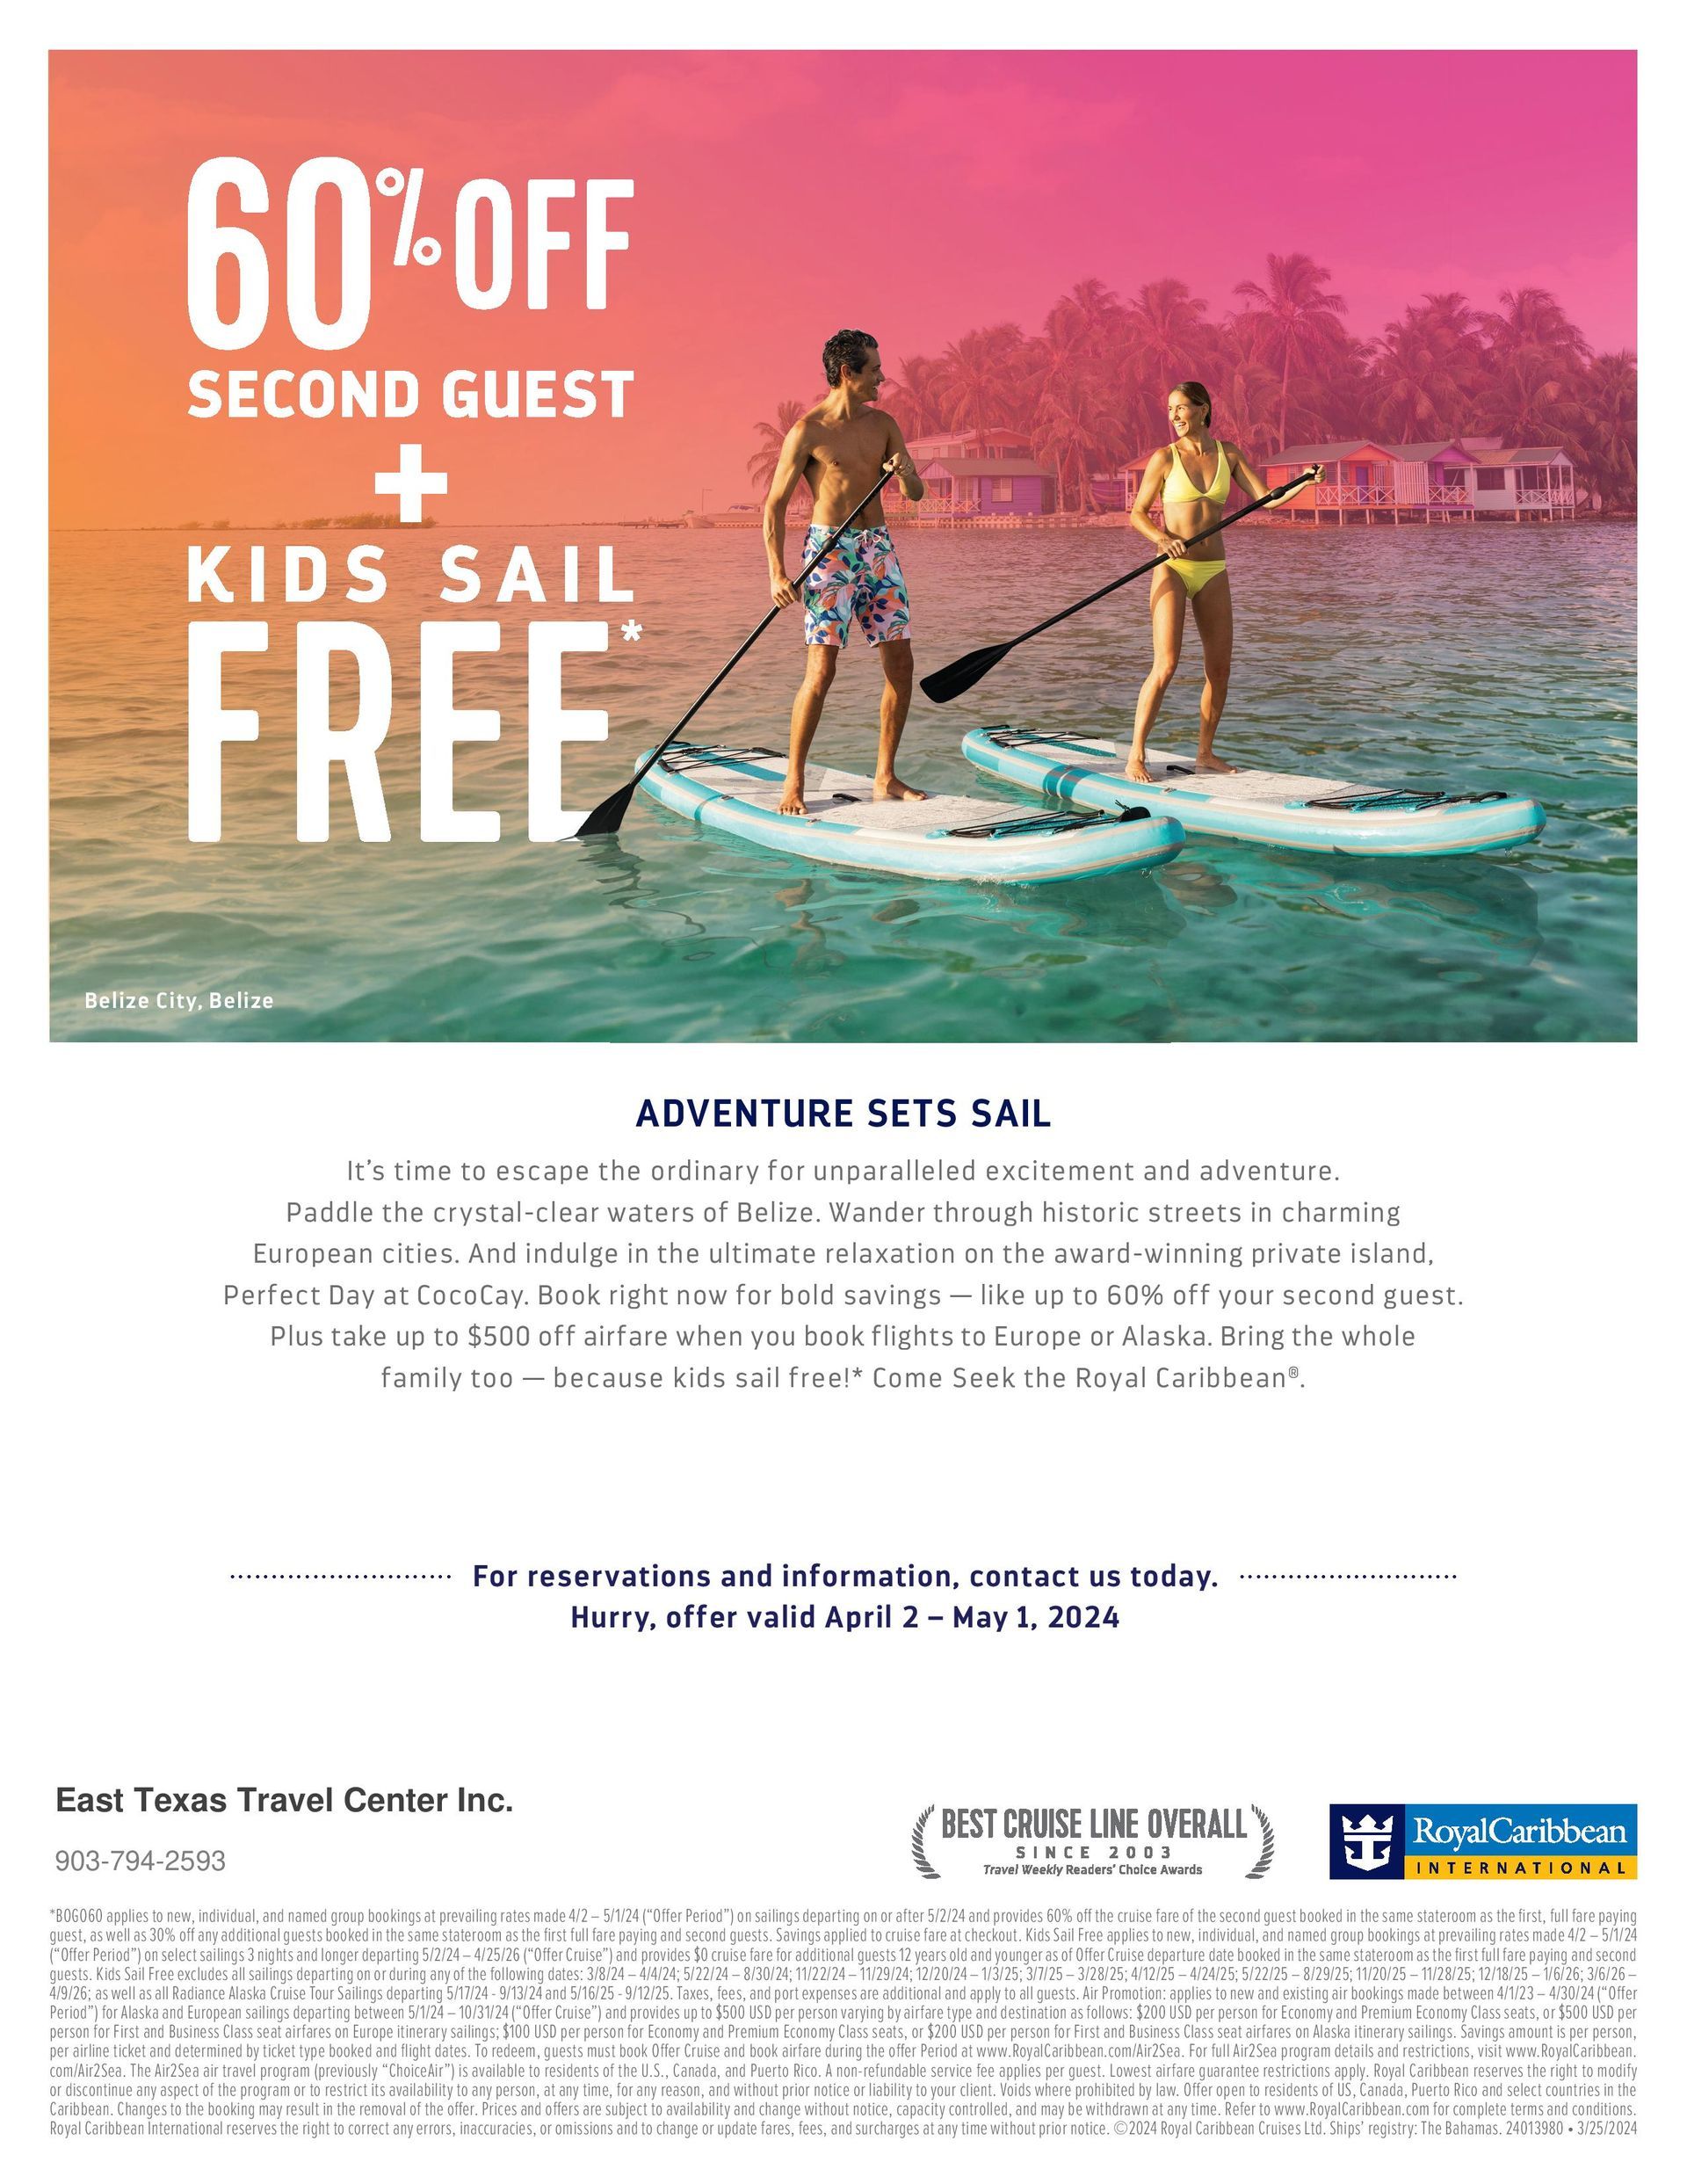 kids sail free; 60percent off second guest; caribbean; Belize; offer expires May 1